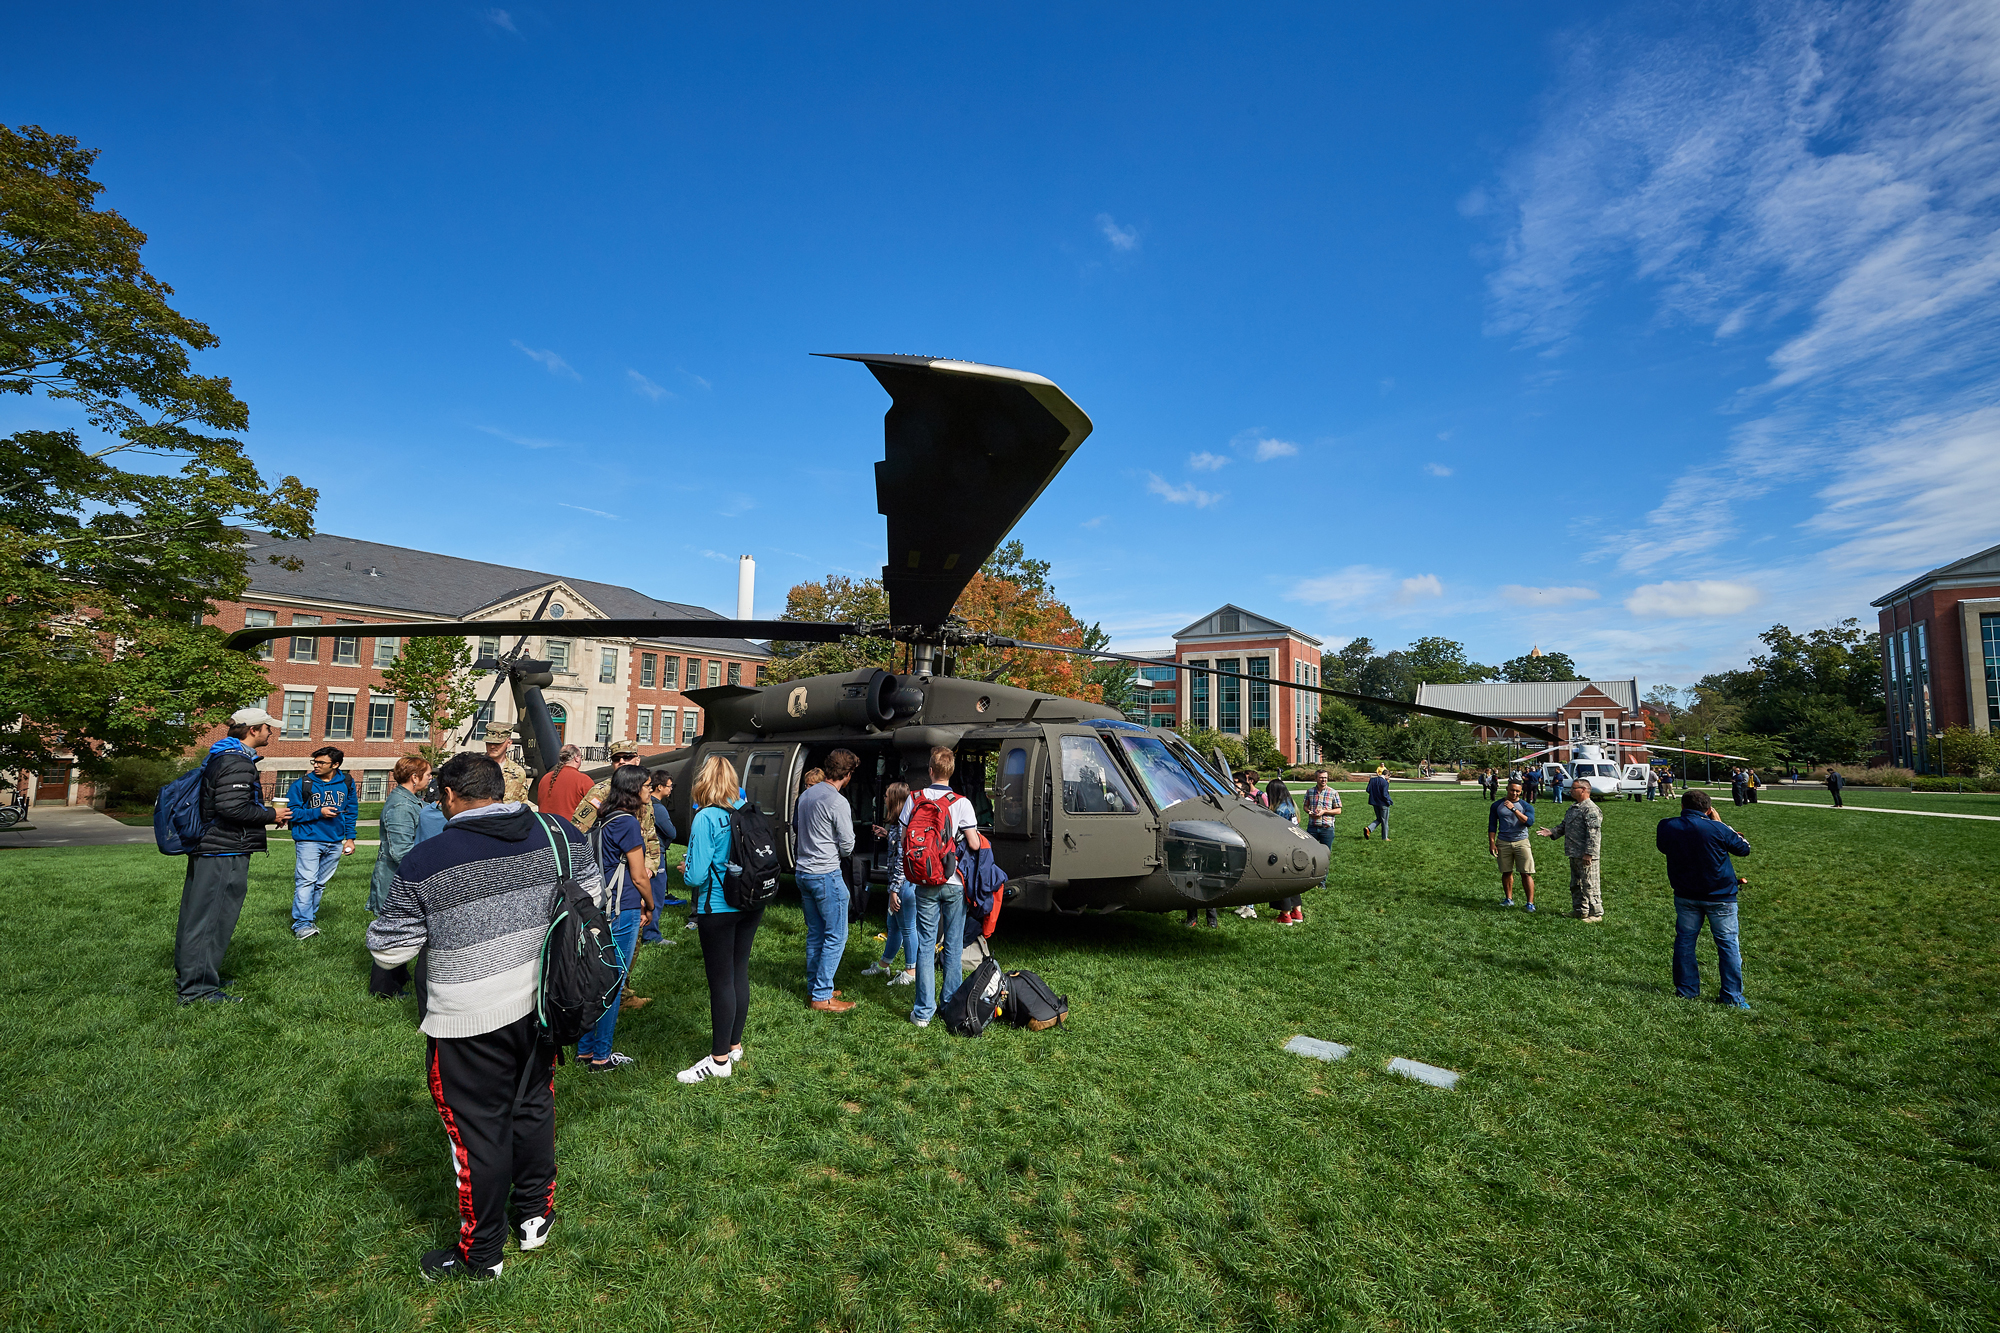 Rotary Club Black Hawk Helicopter over Campus